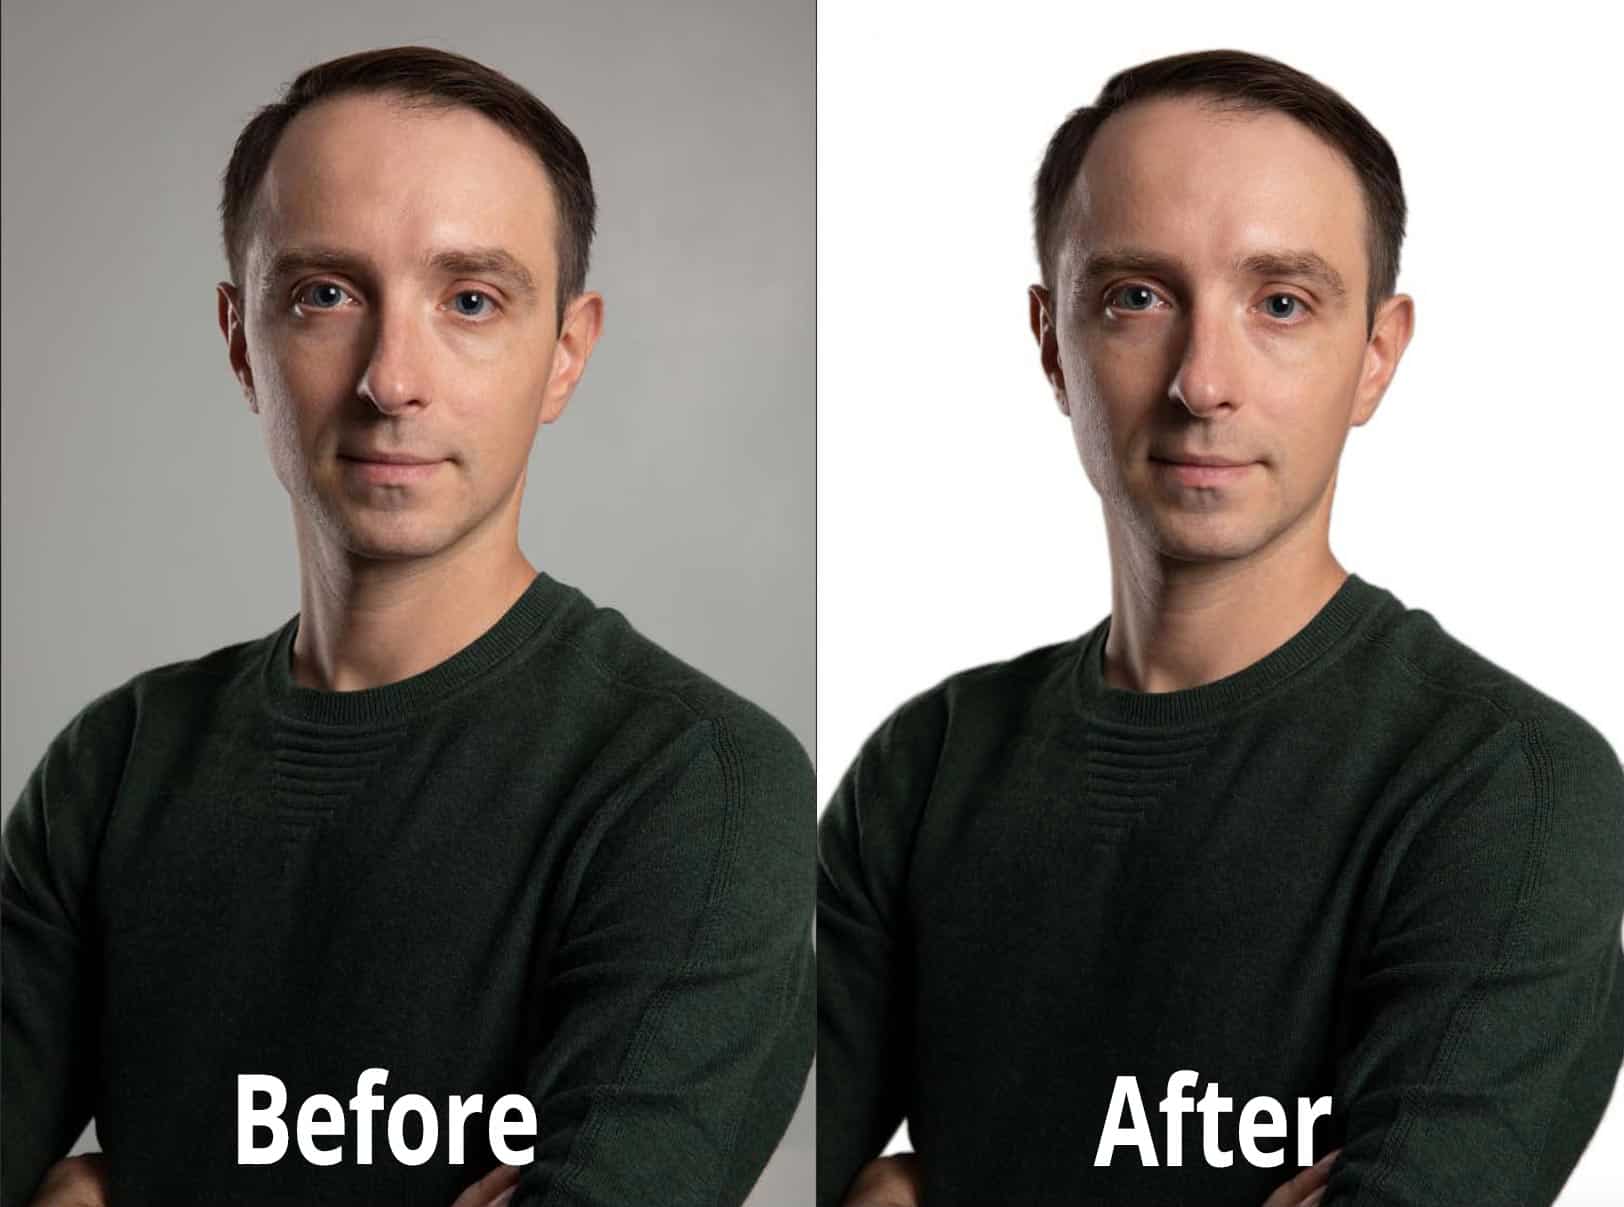 Details 100 how to change photo background to white